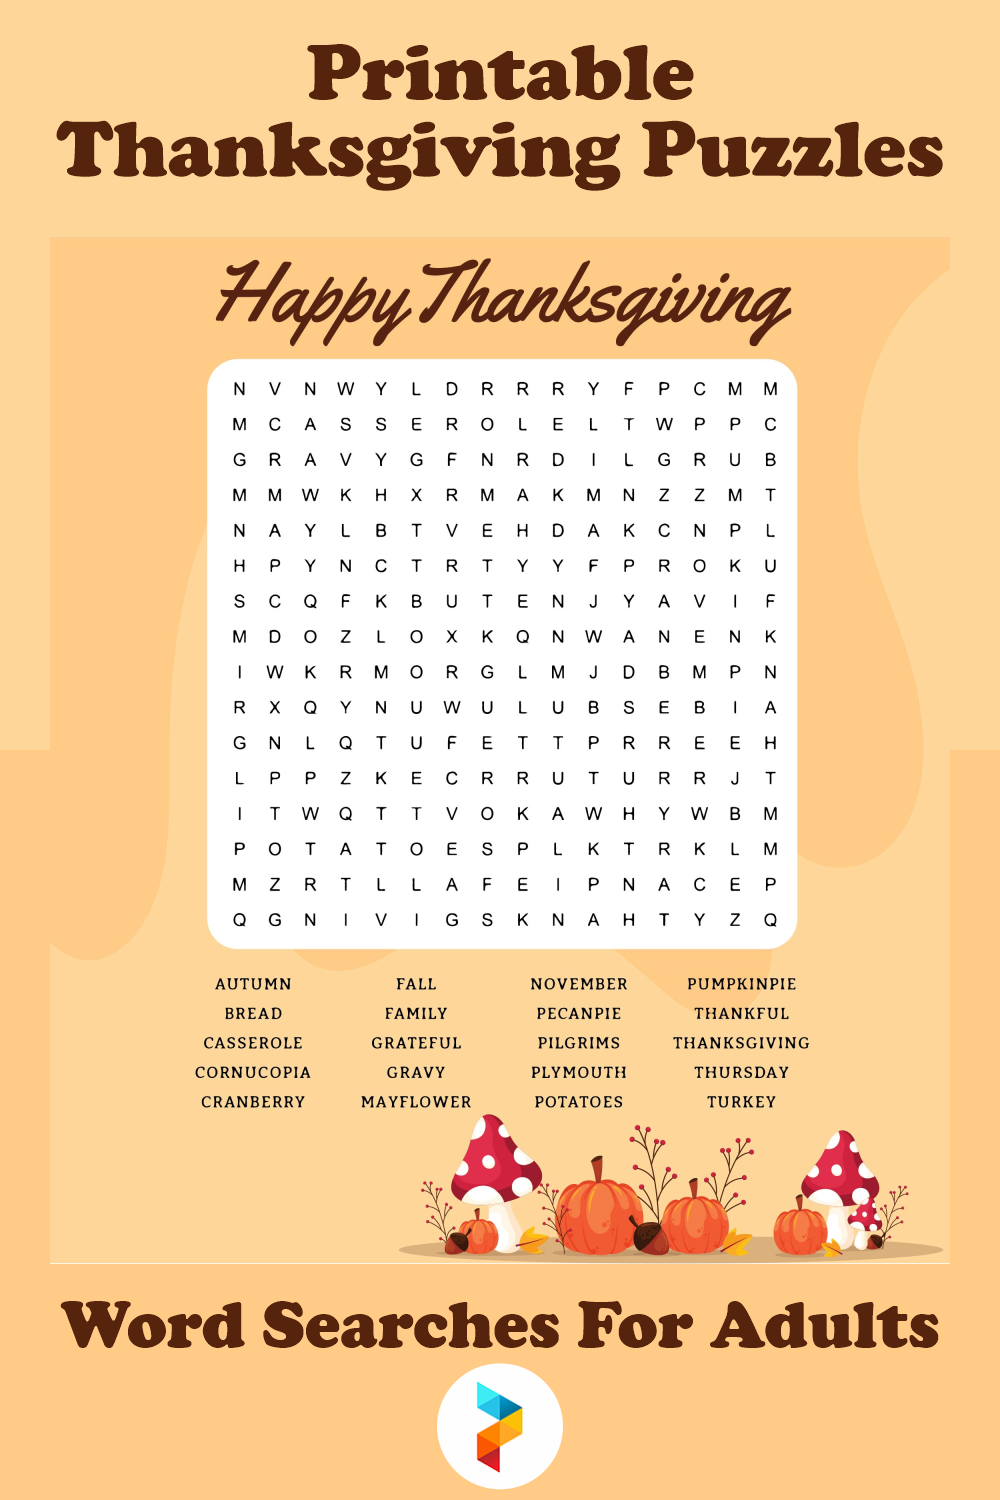 Printable Thanksgiving Puzzles Word Searches For Adults